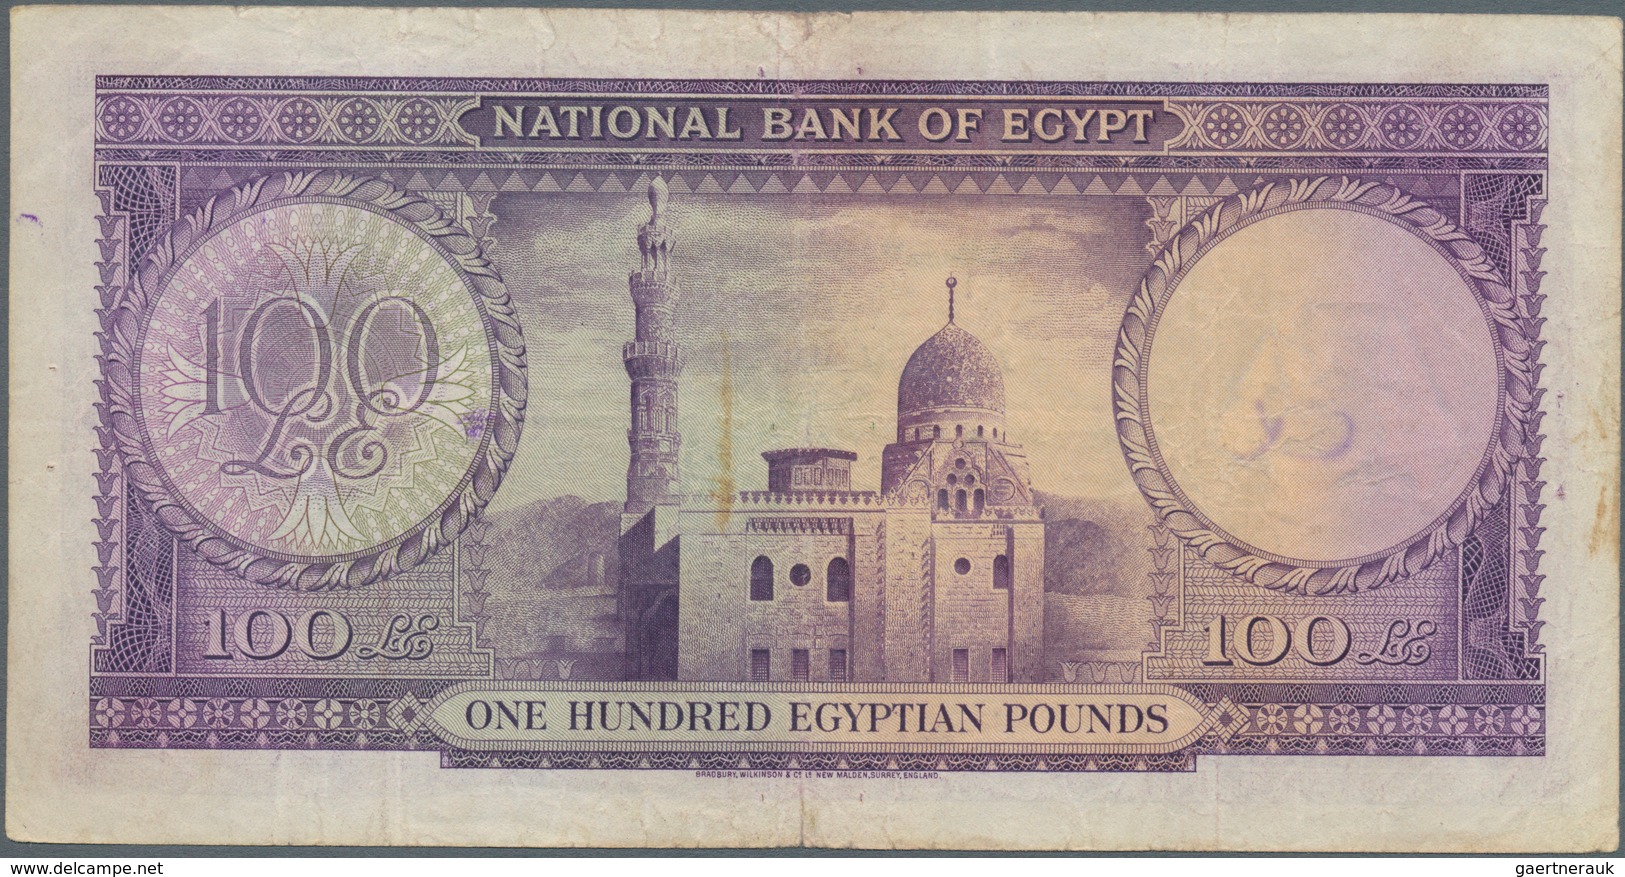 01396 Egypt / Ägypten: 100 Pounds 1951 P. 27b, Used With Folds And Creases, A Small Pen Writing At Left, P - Egitto